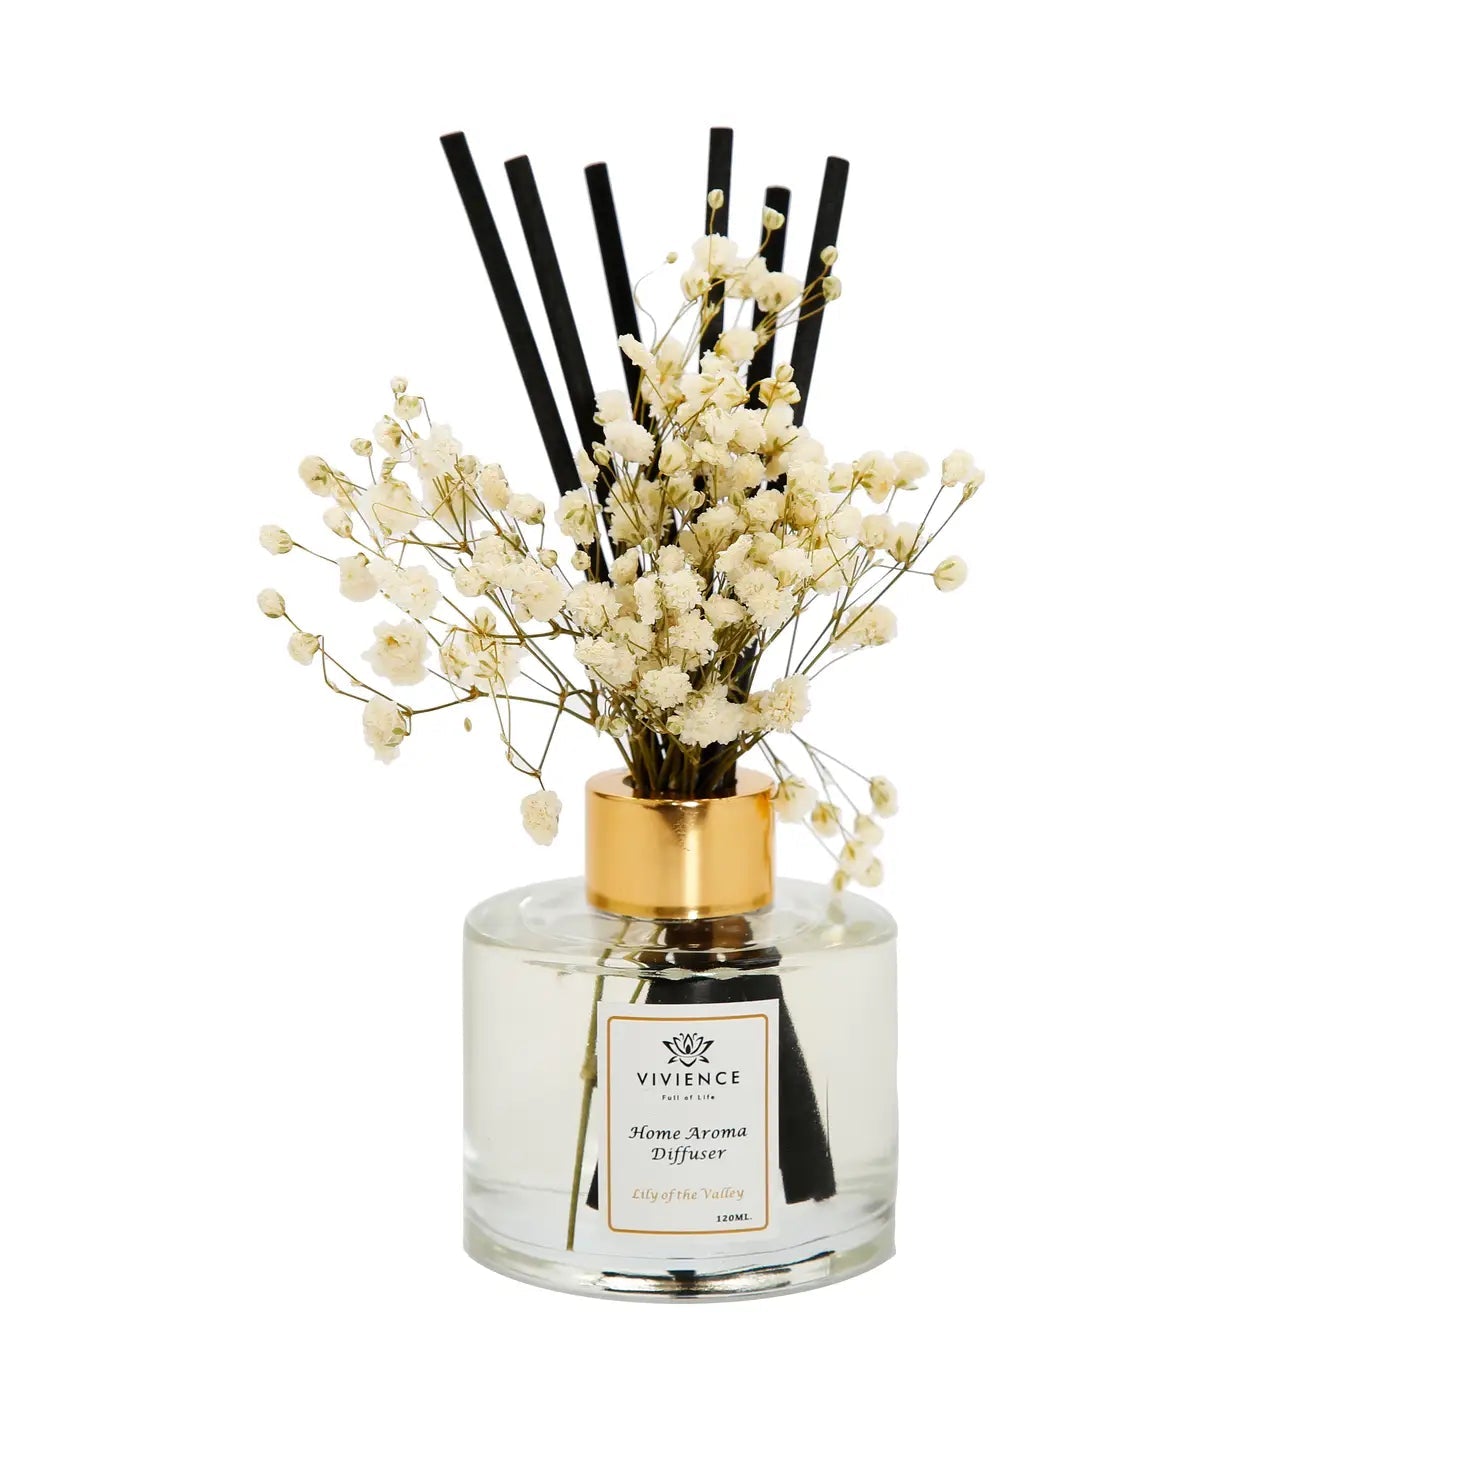 Clear Bottle Reed Diffuser with Bamboo sticks and White and Pink Flowers Diffuser High Class Touch - Home Decor 